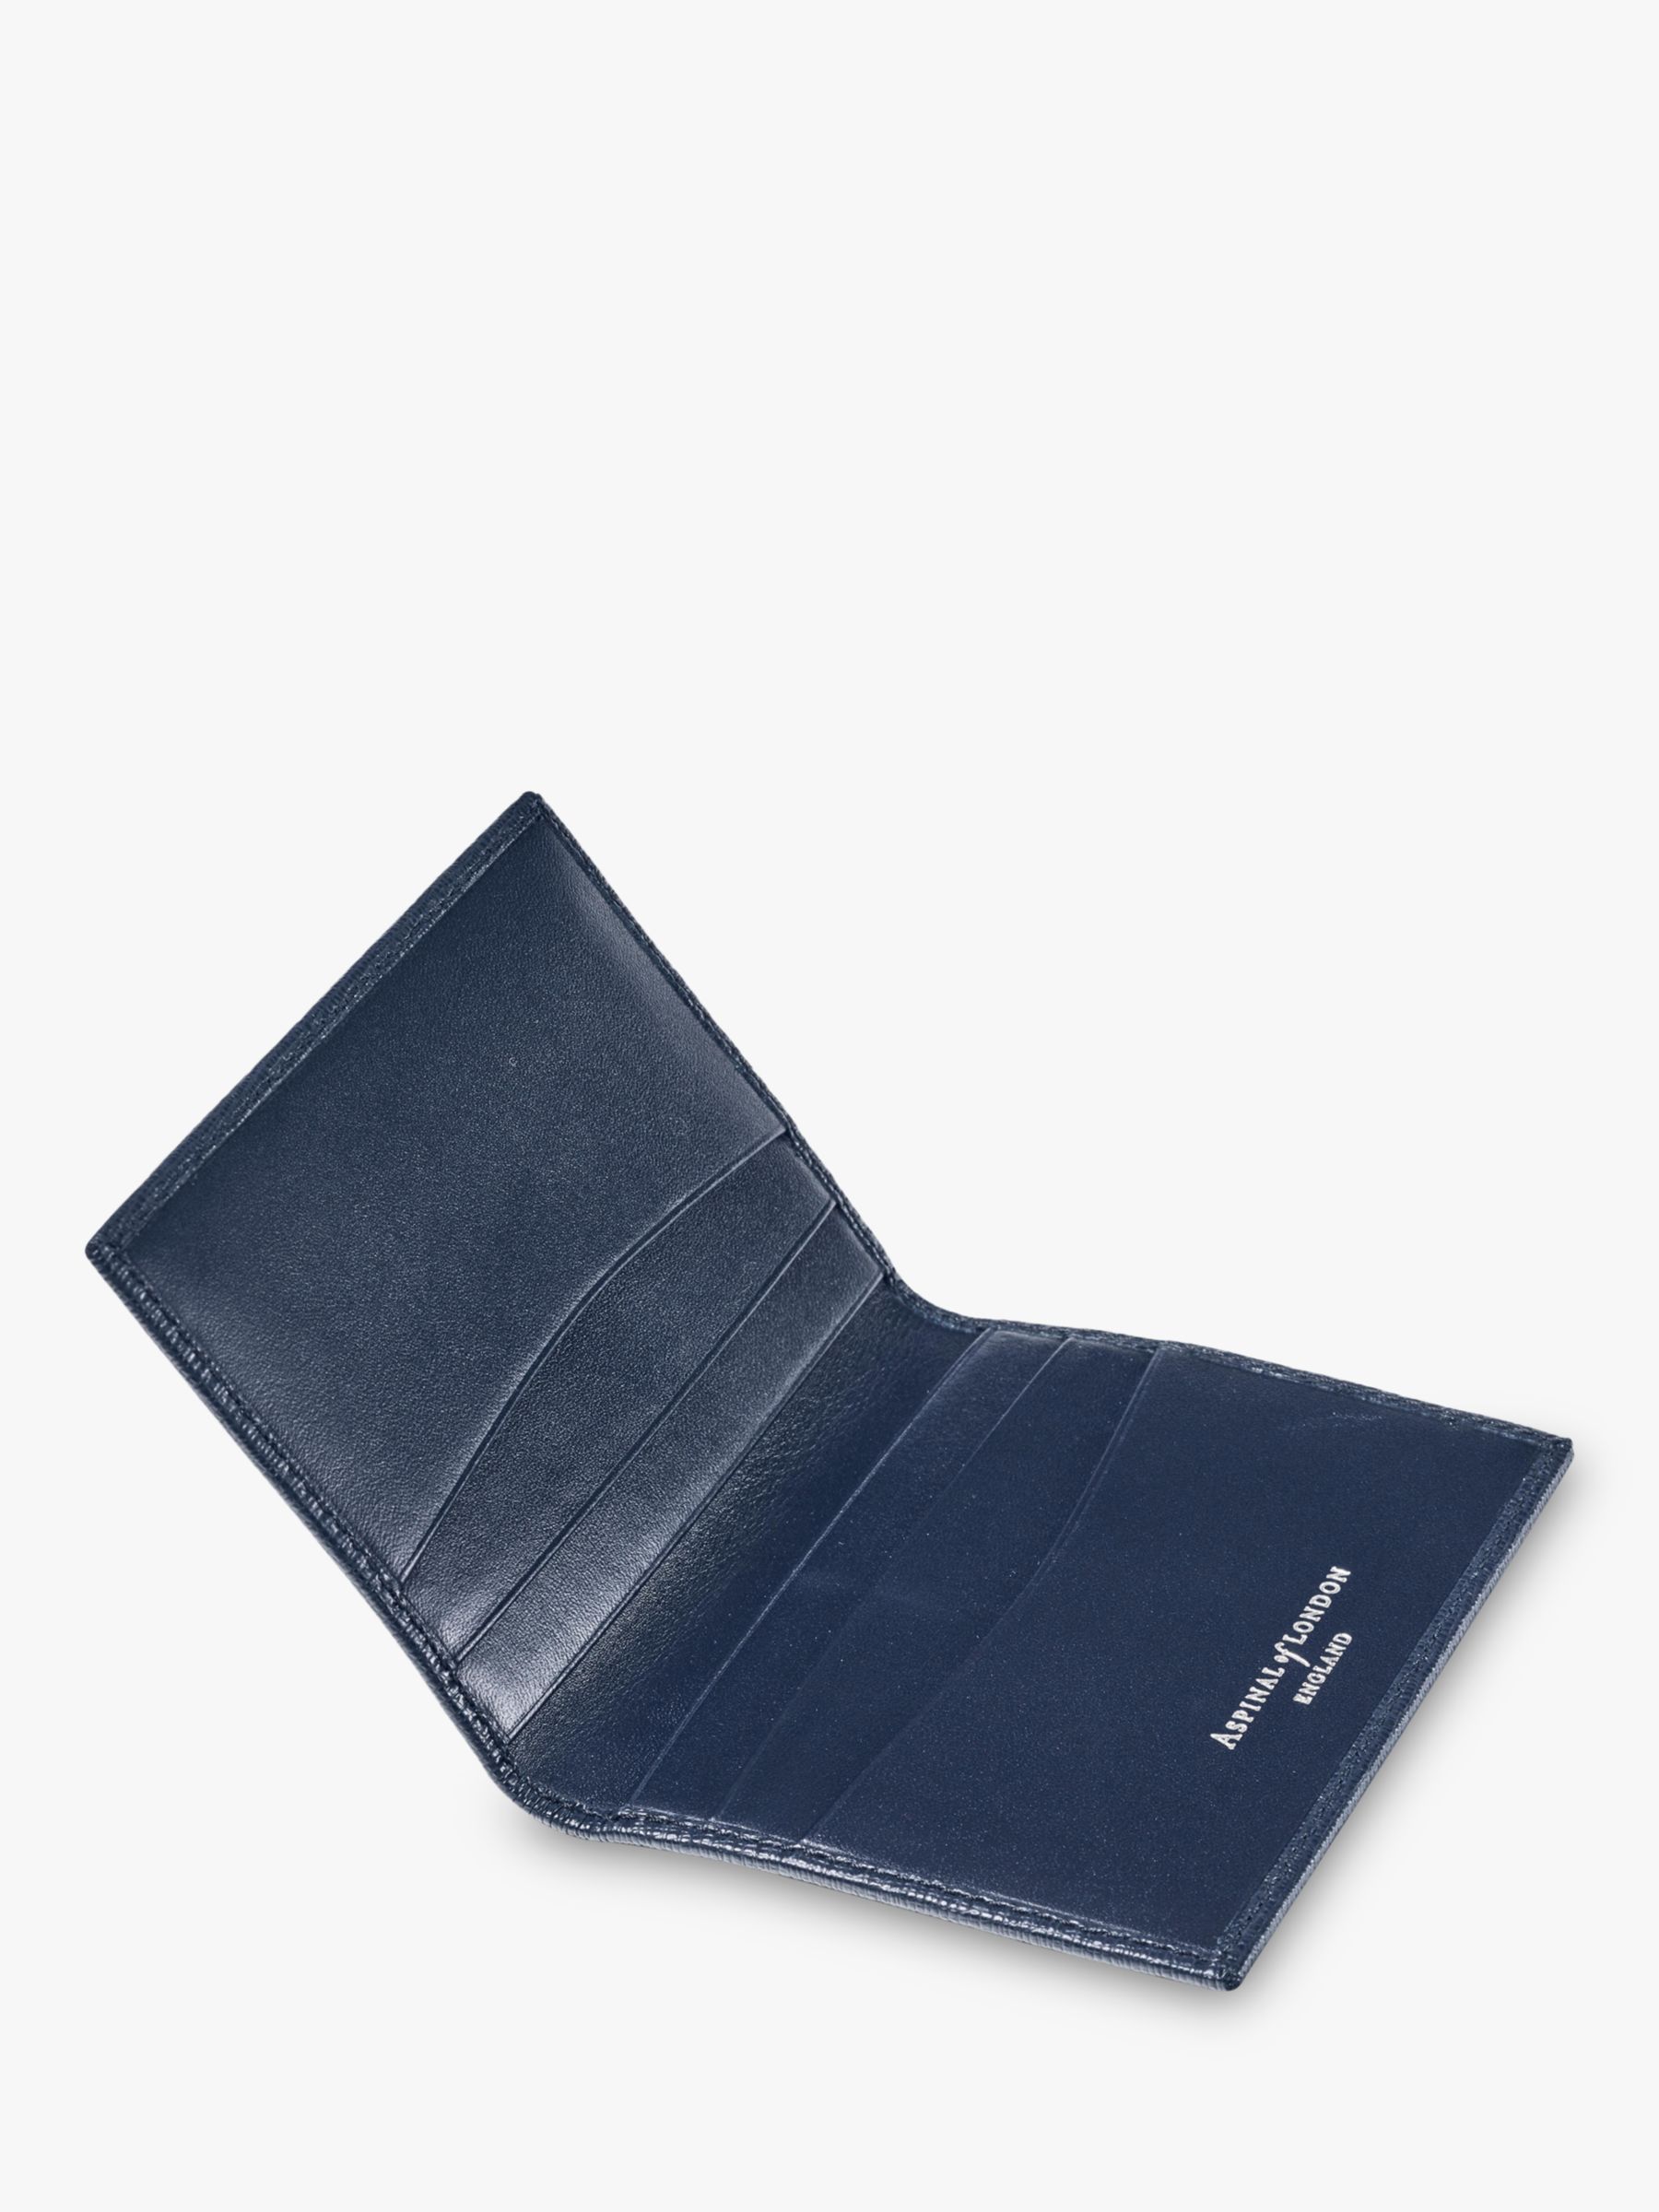 Aspinal of London Double Fold Leather Credit Card Holder, Navy